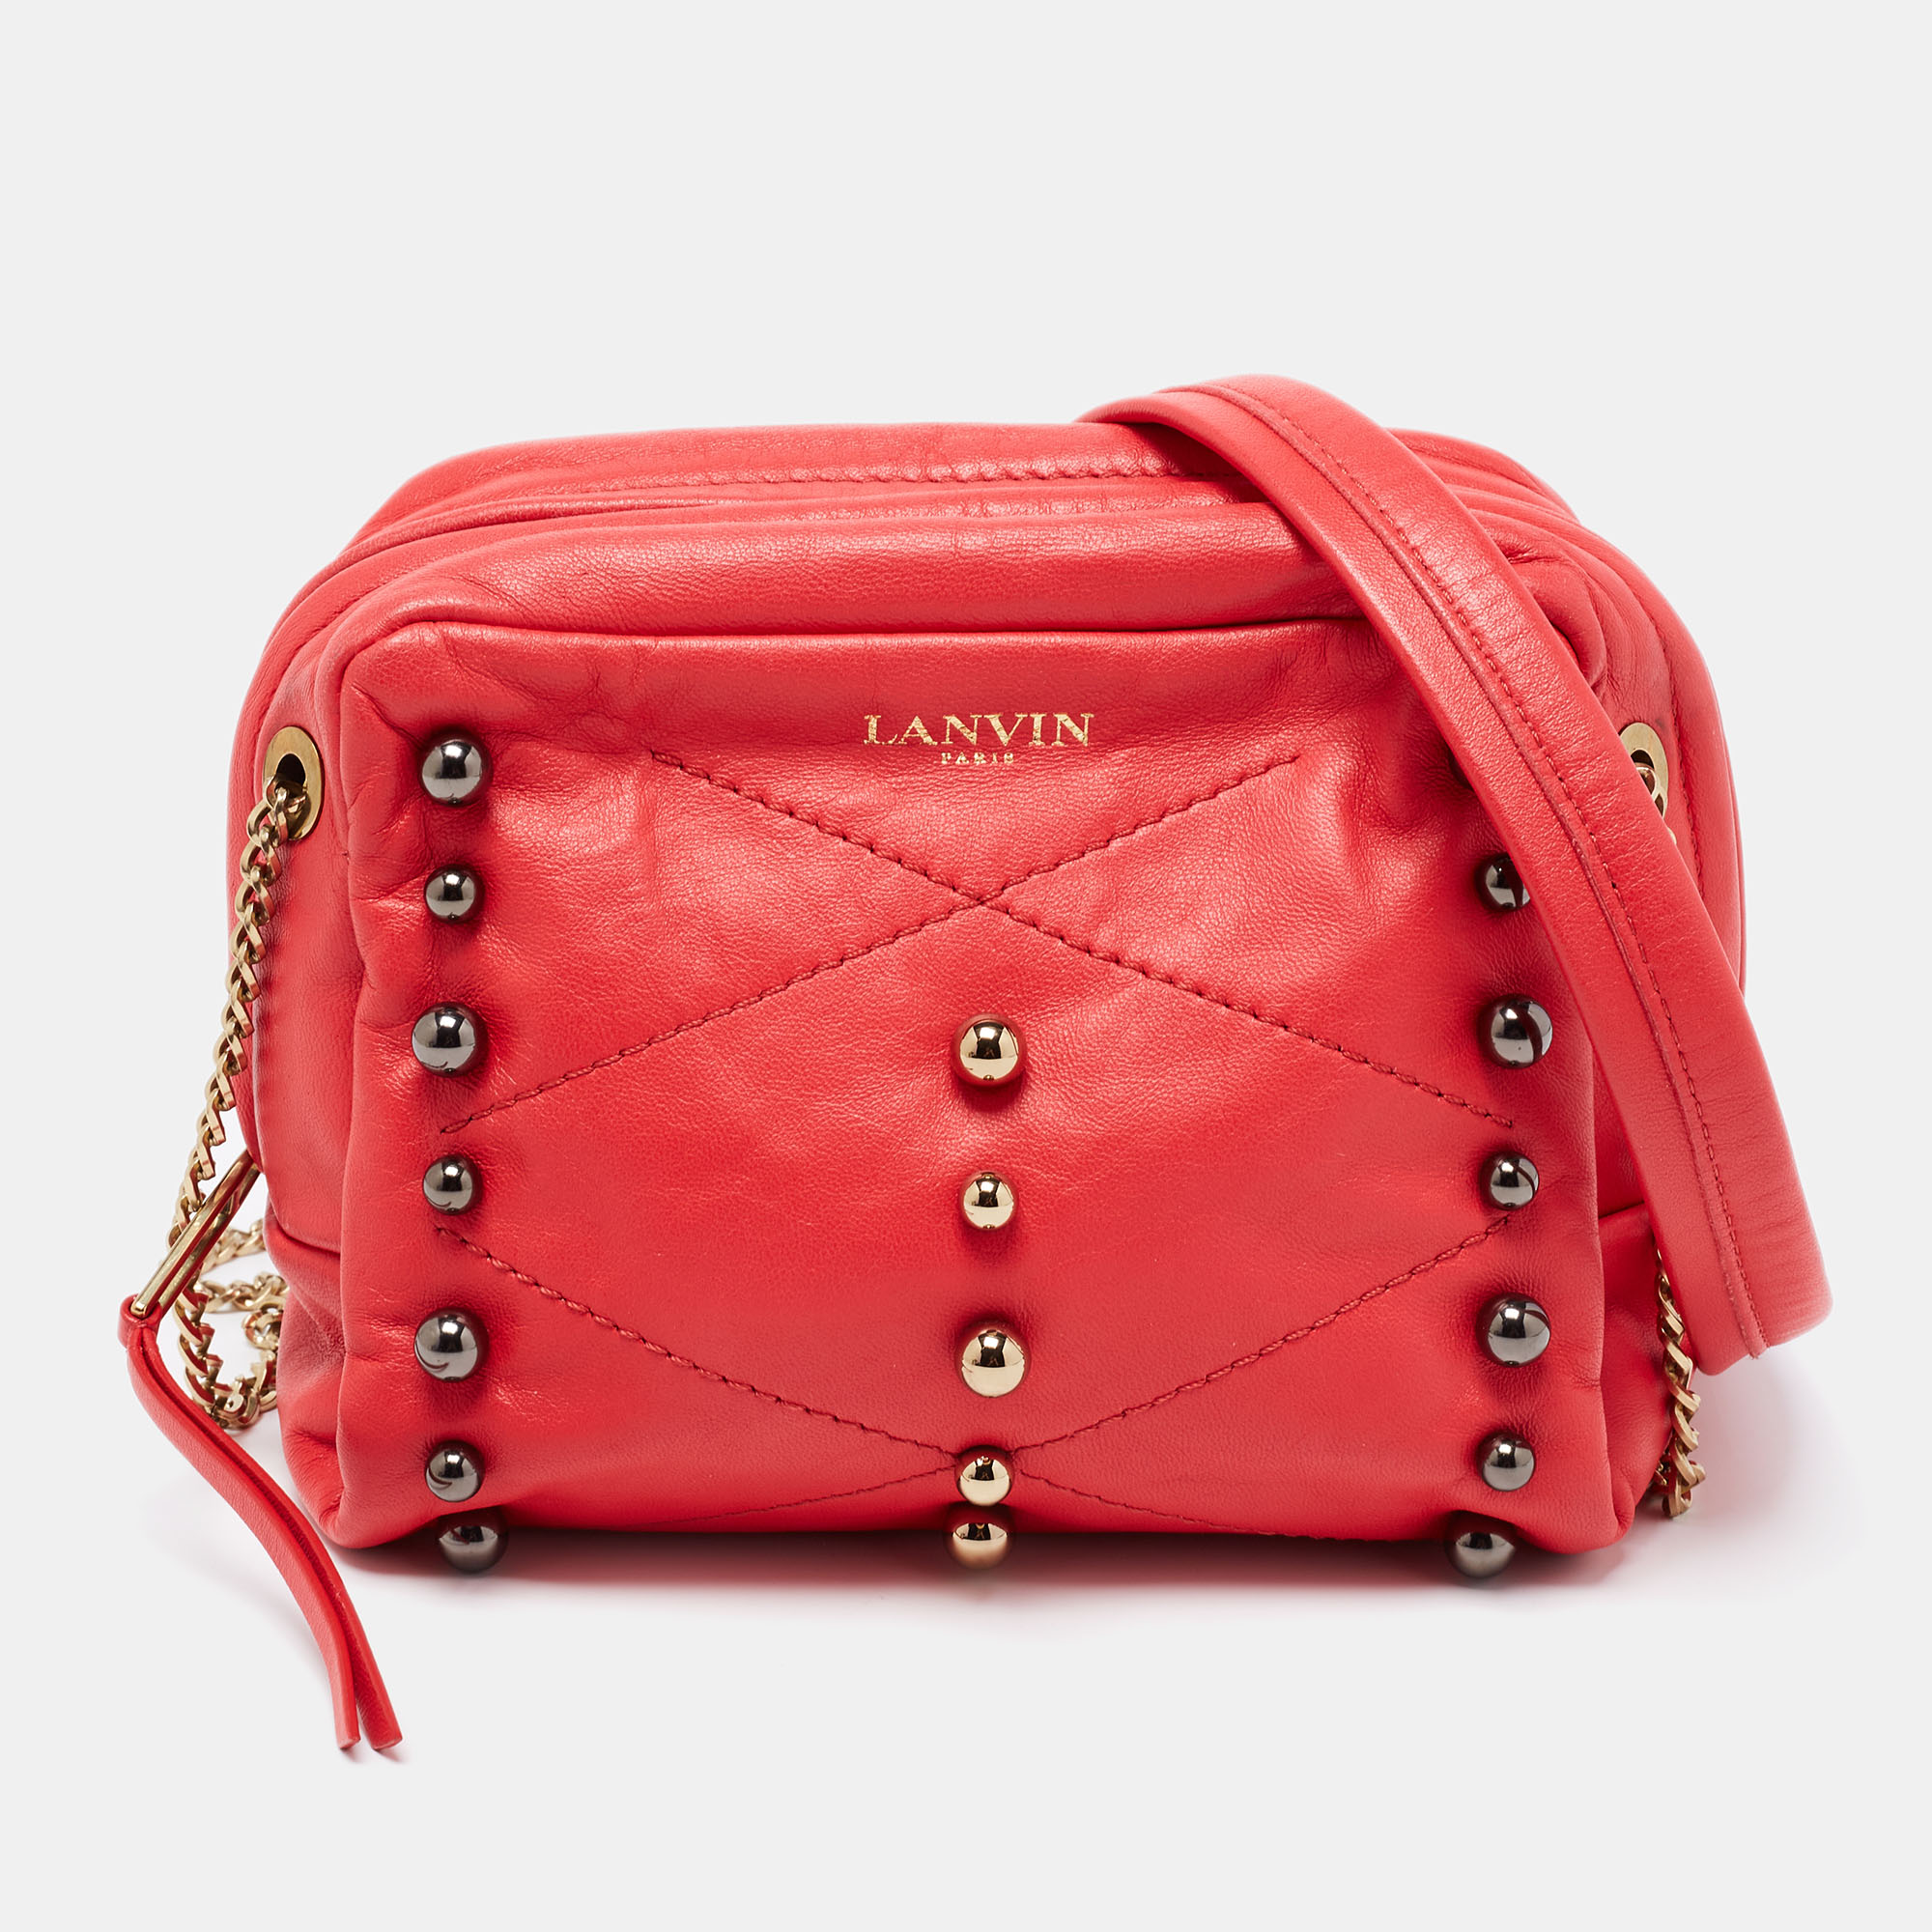 This Lanvin bag with all its striking elements is worth every penny. Created from leather its desirability is enhanced with the addition of studs on the front and the shoulder strap makes it functional. The brand signature on the front lends it a recognizable accent and its lined interior is suitable for keeping your valuables safe.